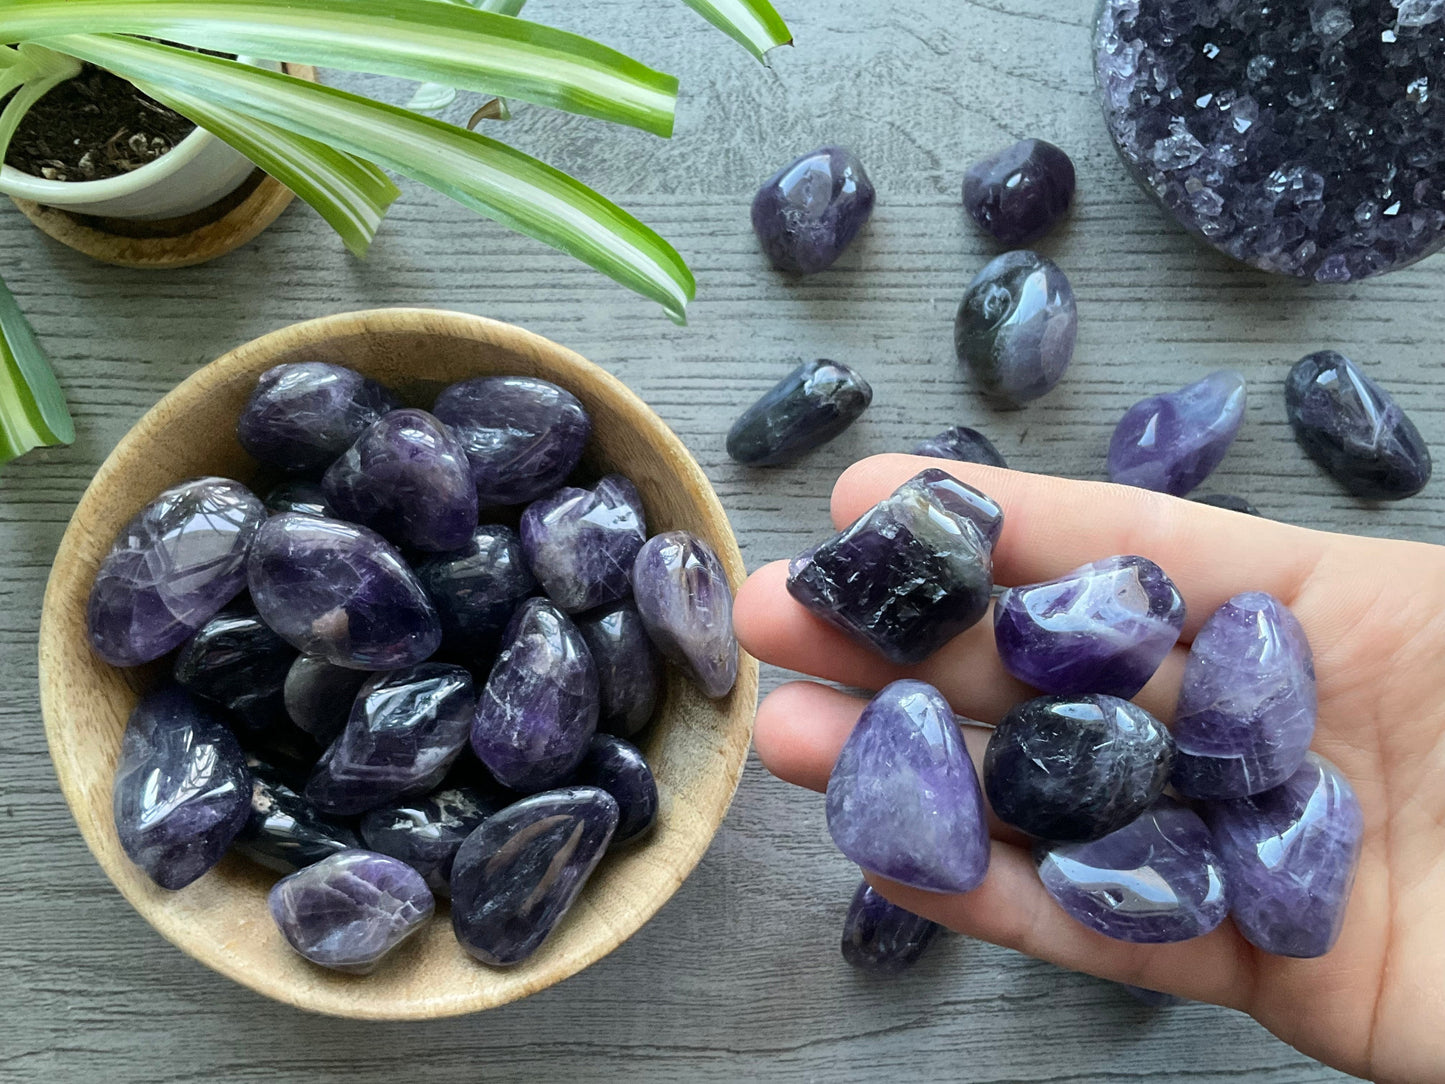 Pictured are various amethyst tumbled stones.